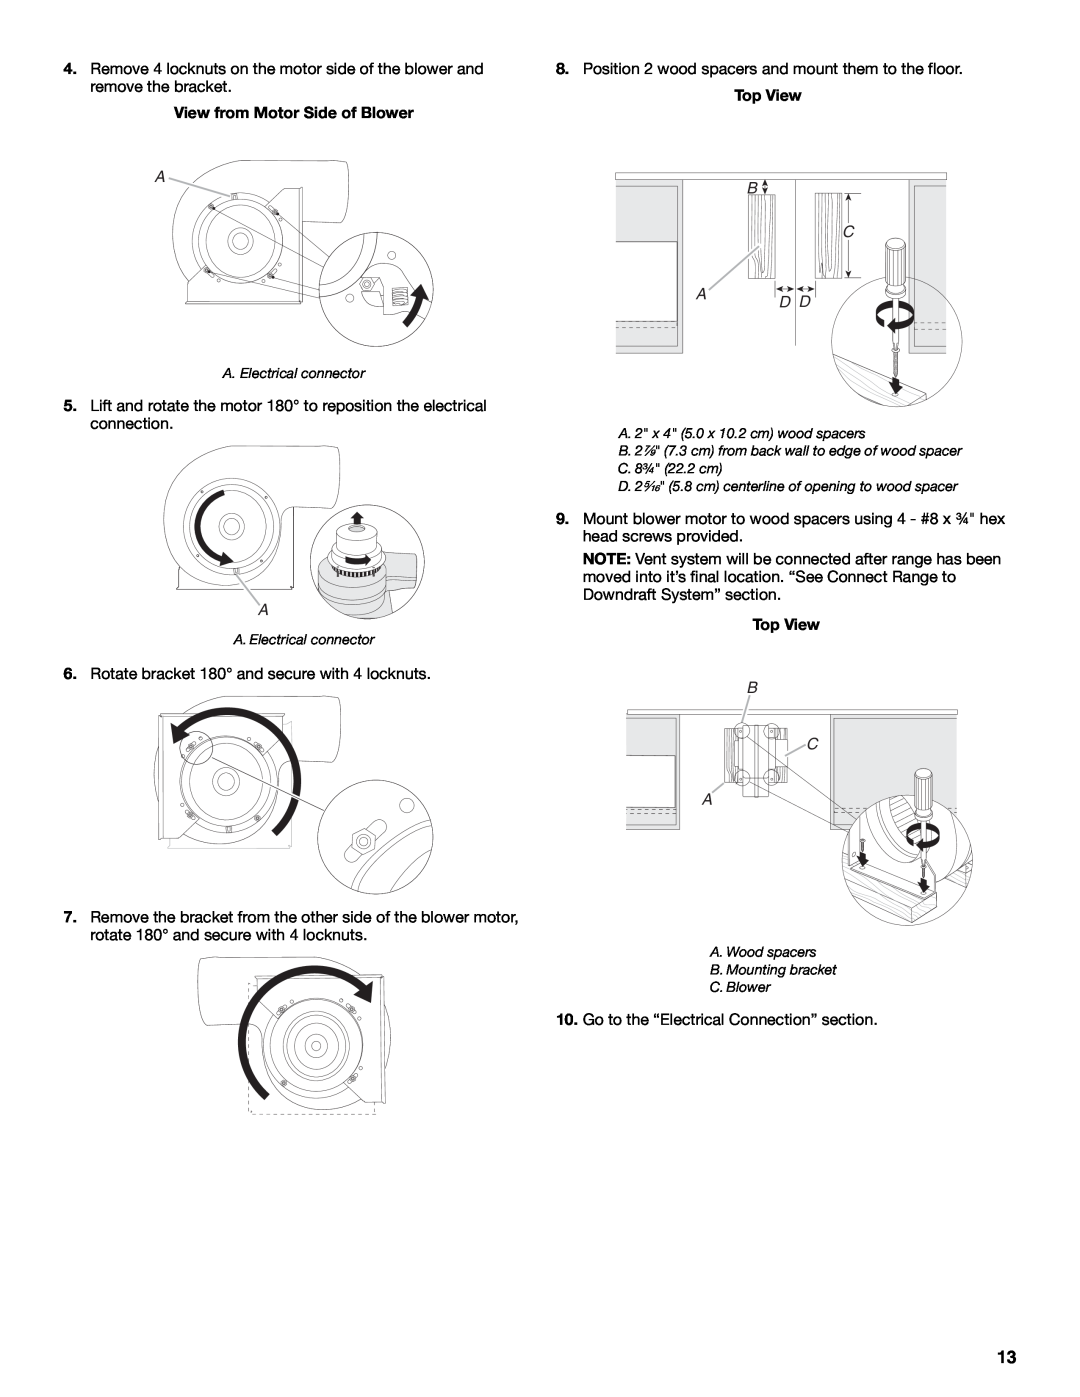 Jenn-Air W10430955A installation instructions View from Motor Side of Blower, Top View 